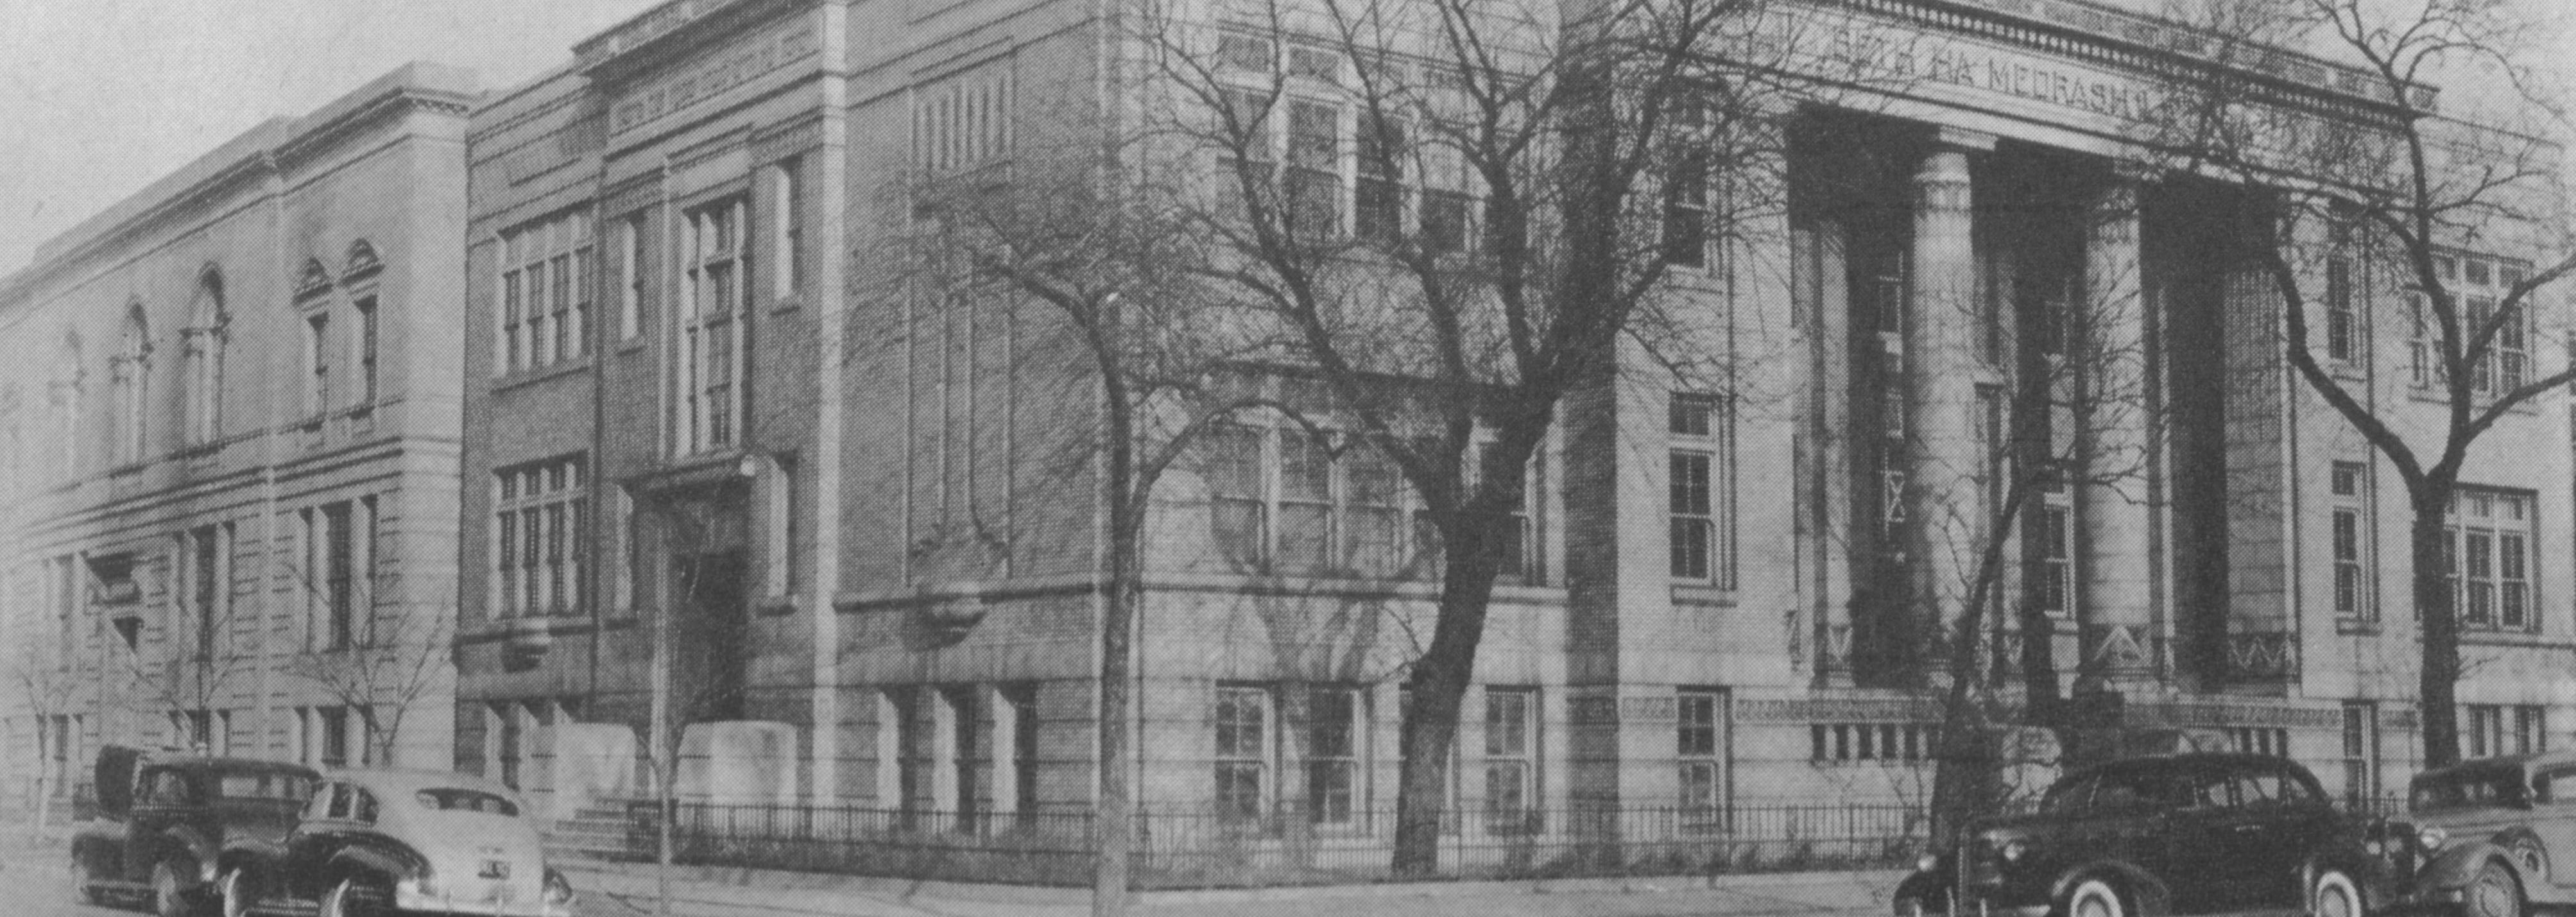 historic photo of htc building